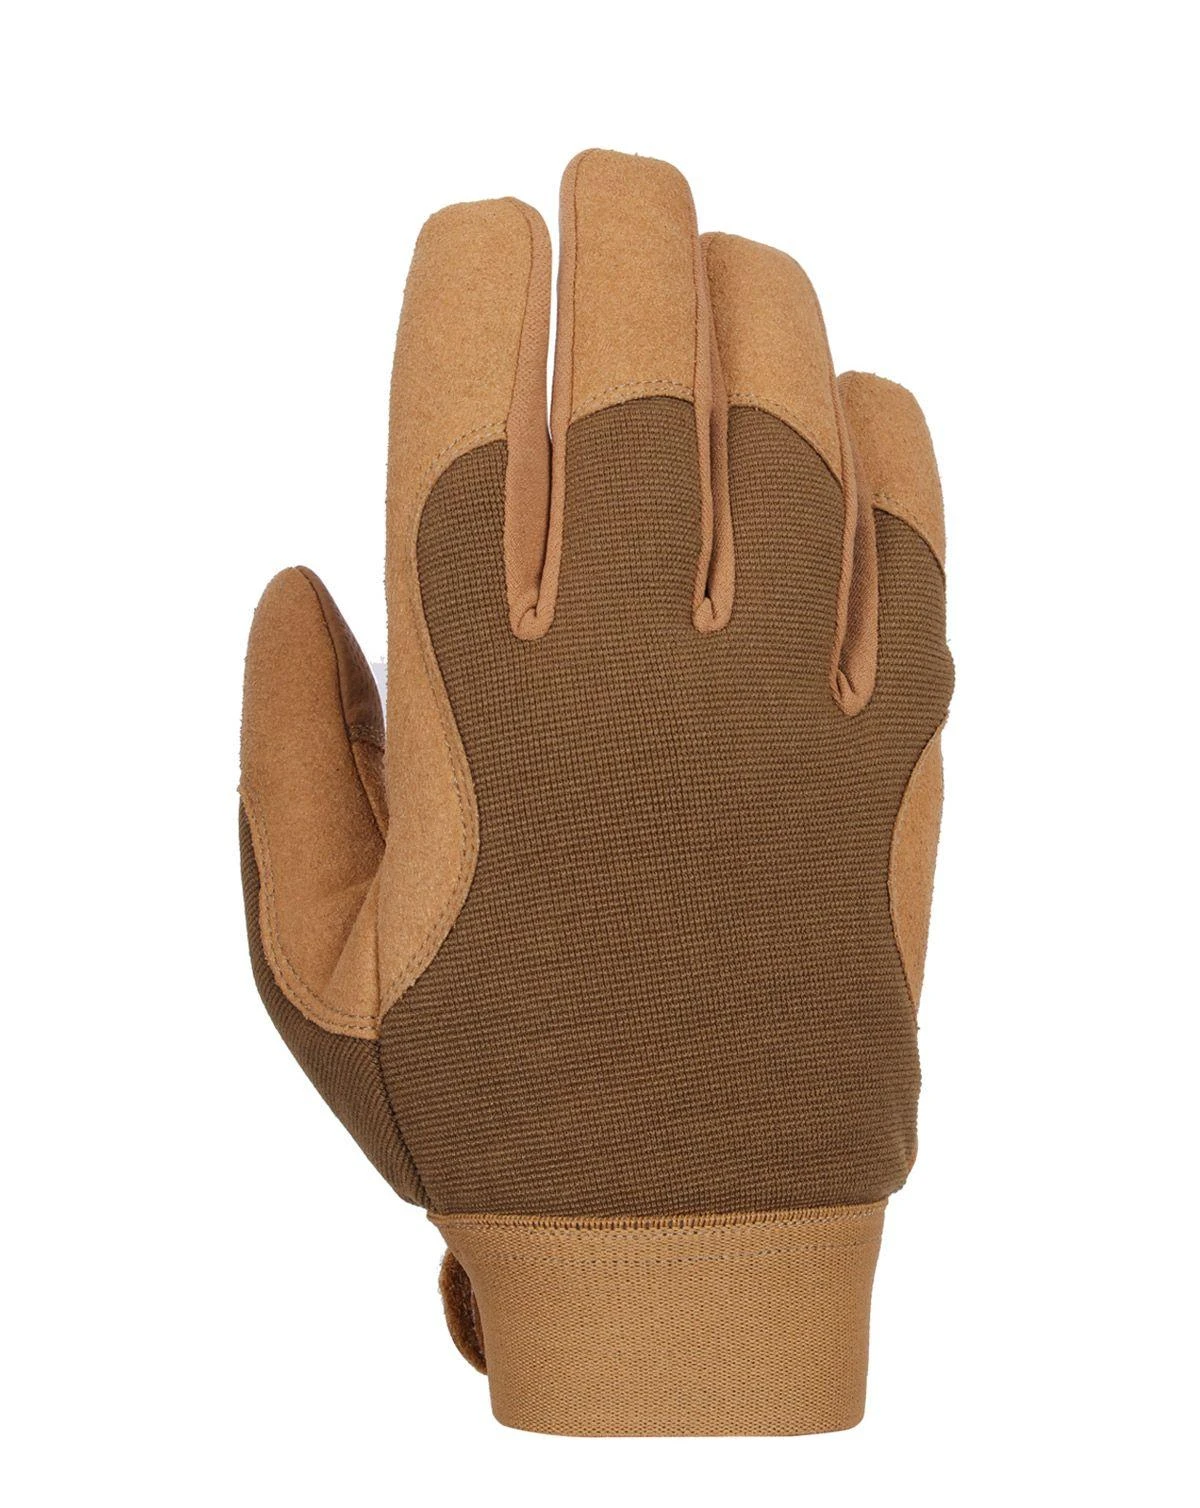 Buy [Gloves & Mittens | Money Back Guarantee | ARMY STAR